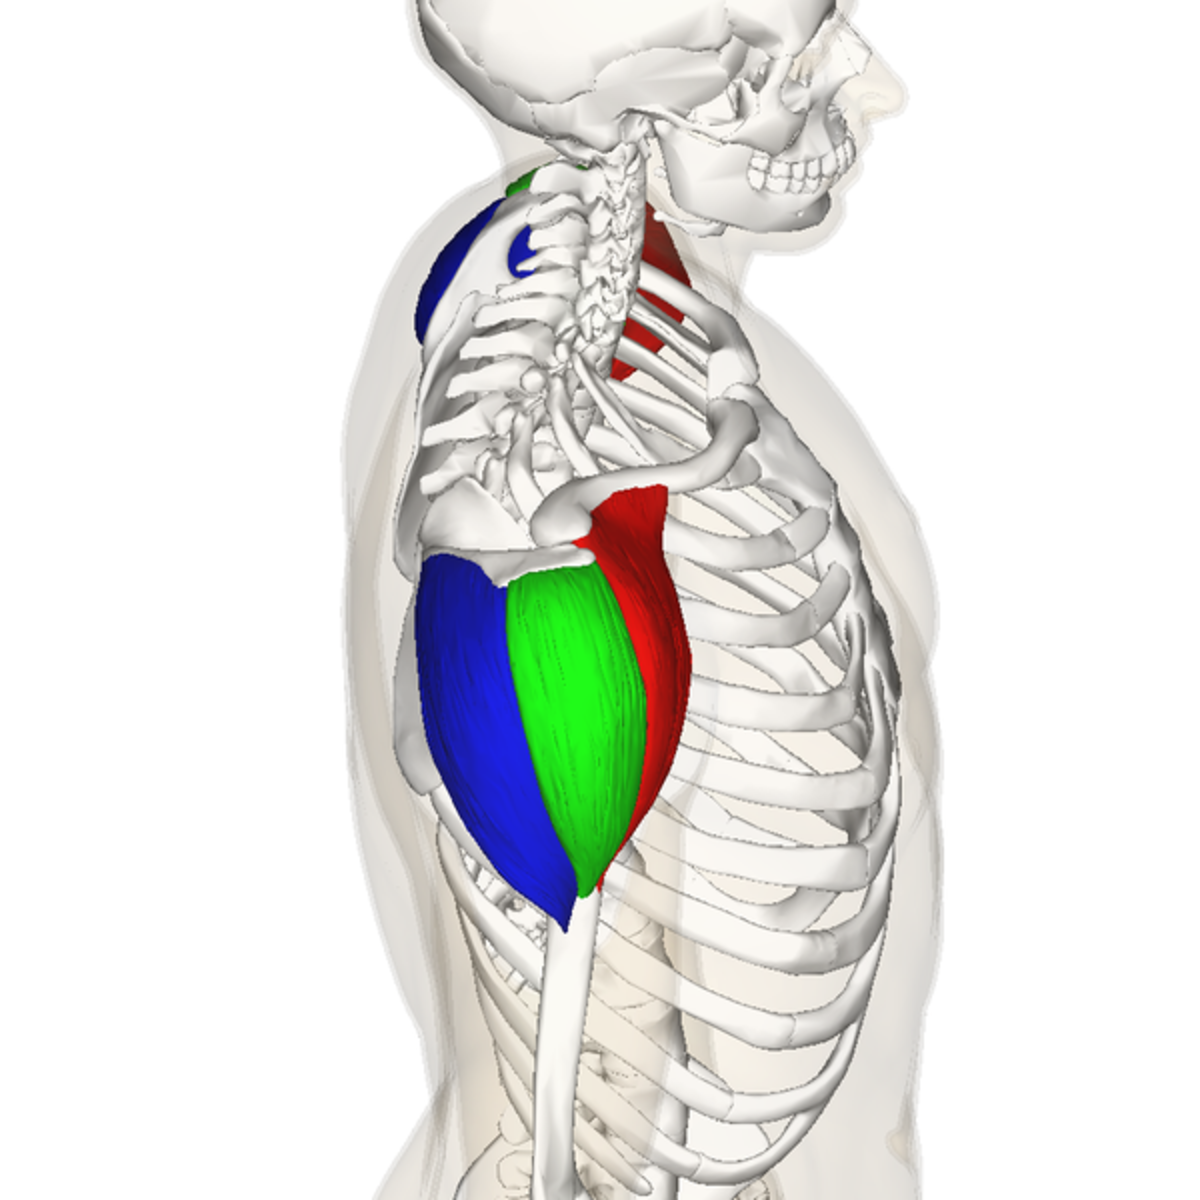 <p>action of posterior deltoid</p>